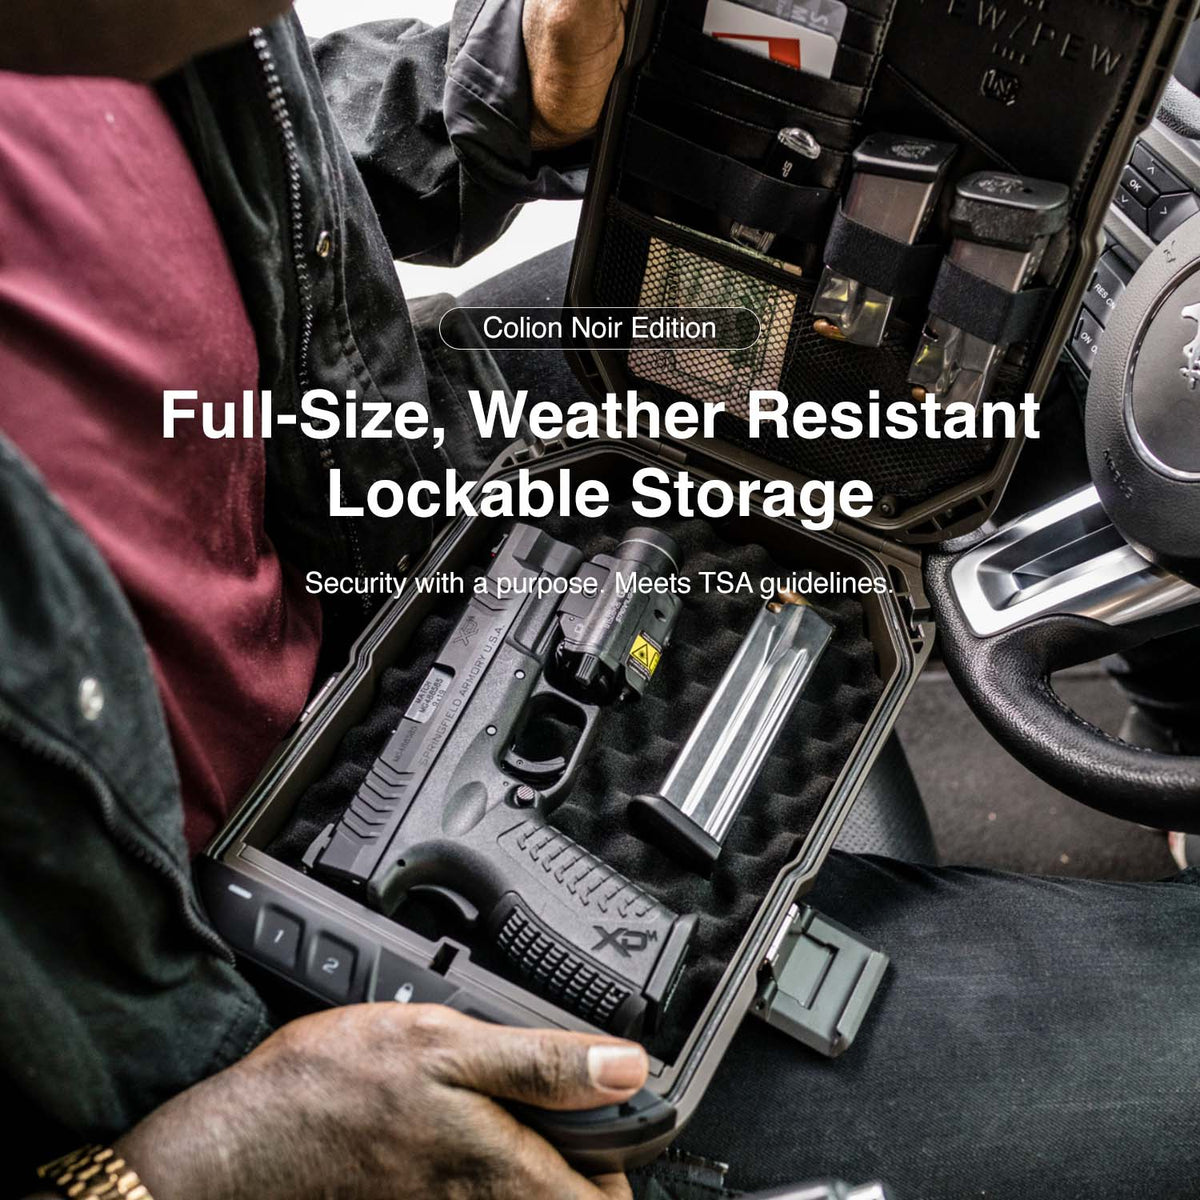 Vaultek - Biometric LifePod 2.0 Colion Noir Edition Full-Size Rugged Airtight Weather Resistant Storage with Built in Lock